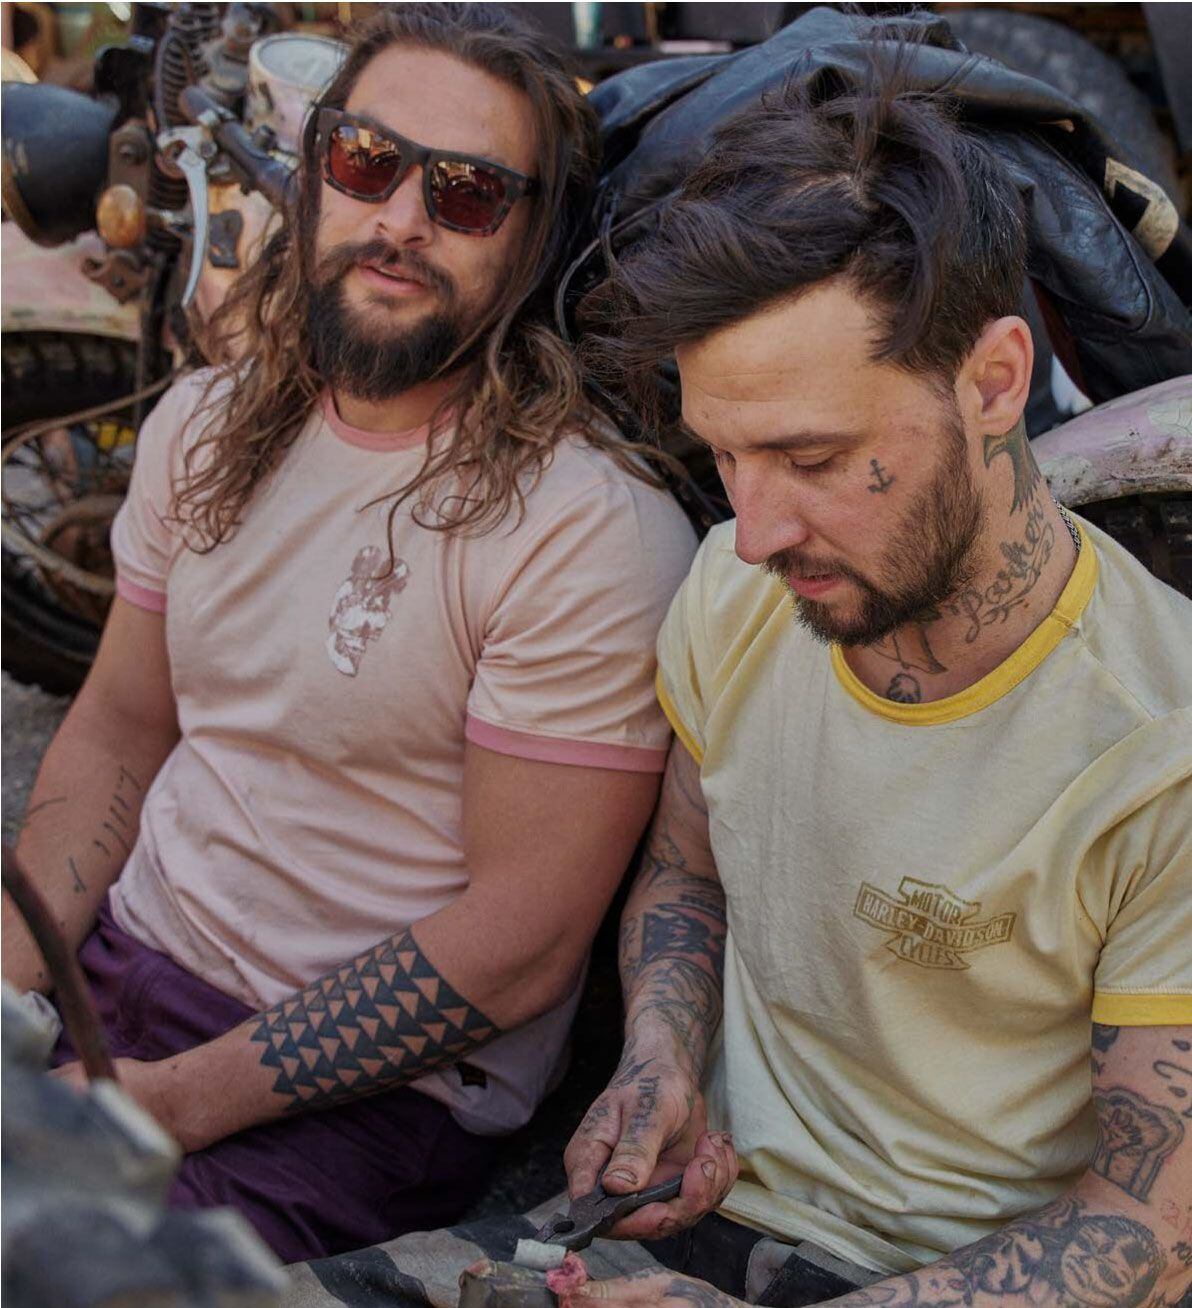 Jason Momoa and a face-tattooed friend showing off the pastel ringer T-shirts from the collection.